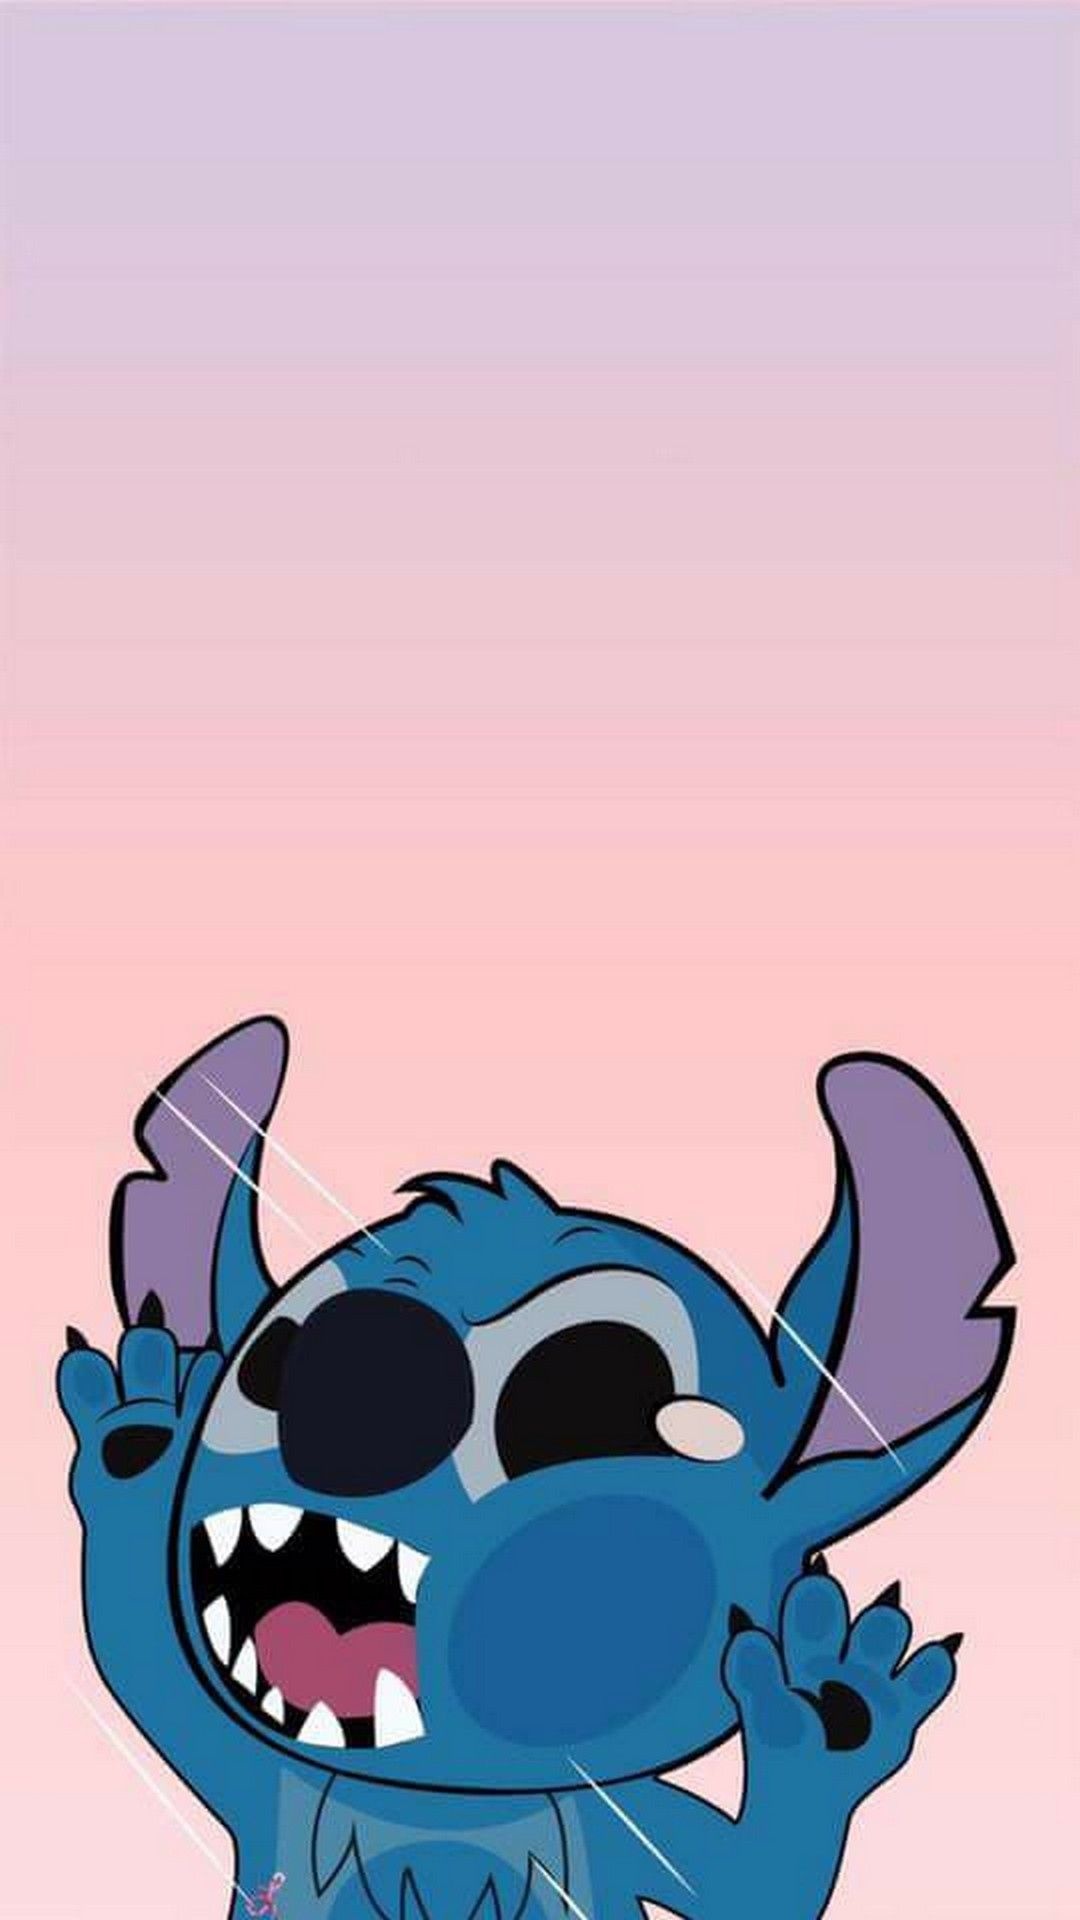 Stitch animation, Angry Stitch wallpapers, Adorable blue creature, Cute alien companion, 1080x1920 Full HD Phone